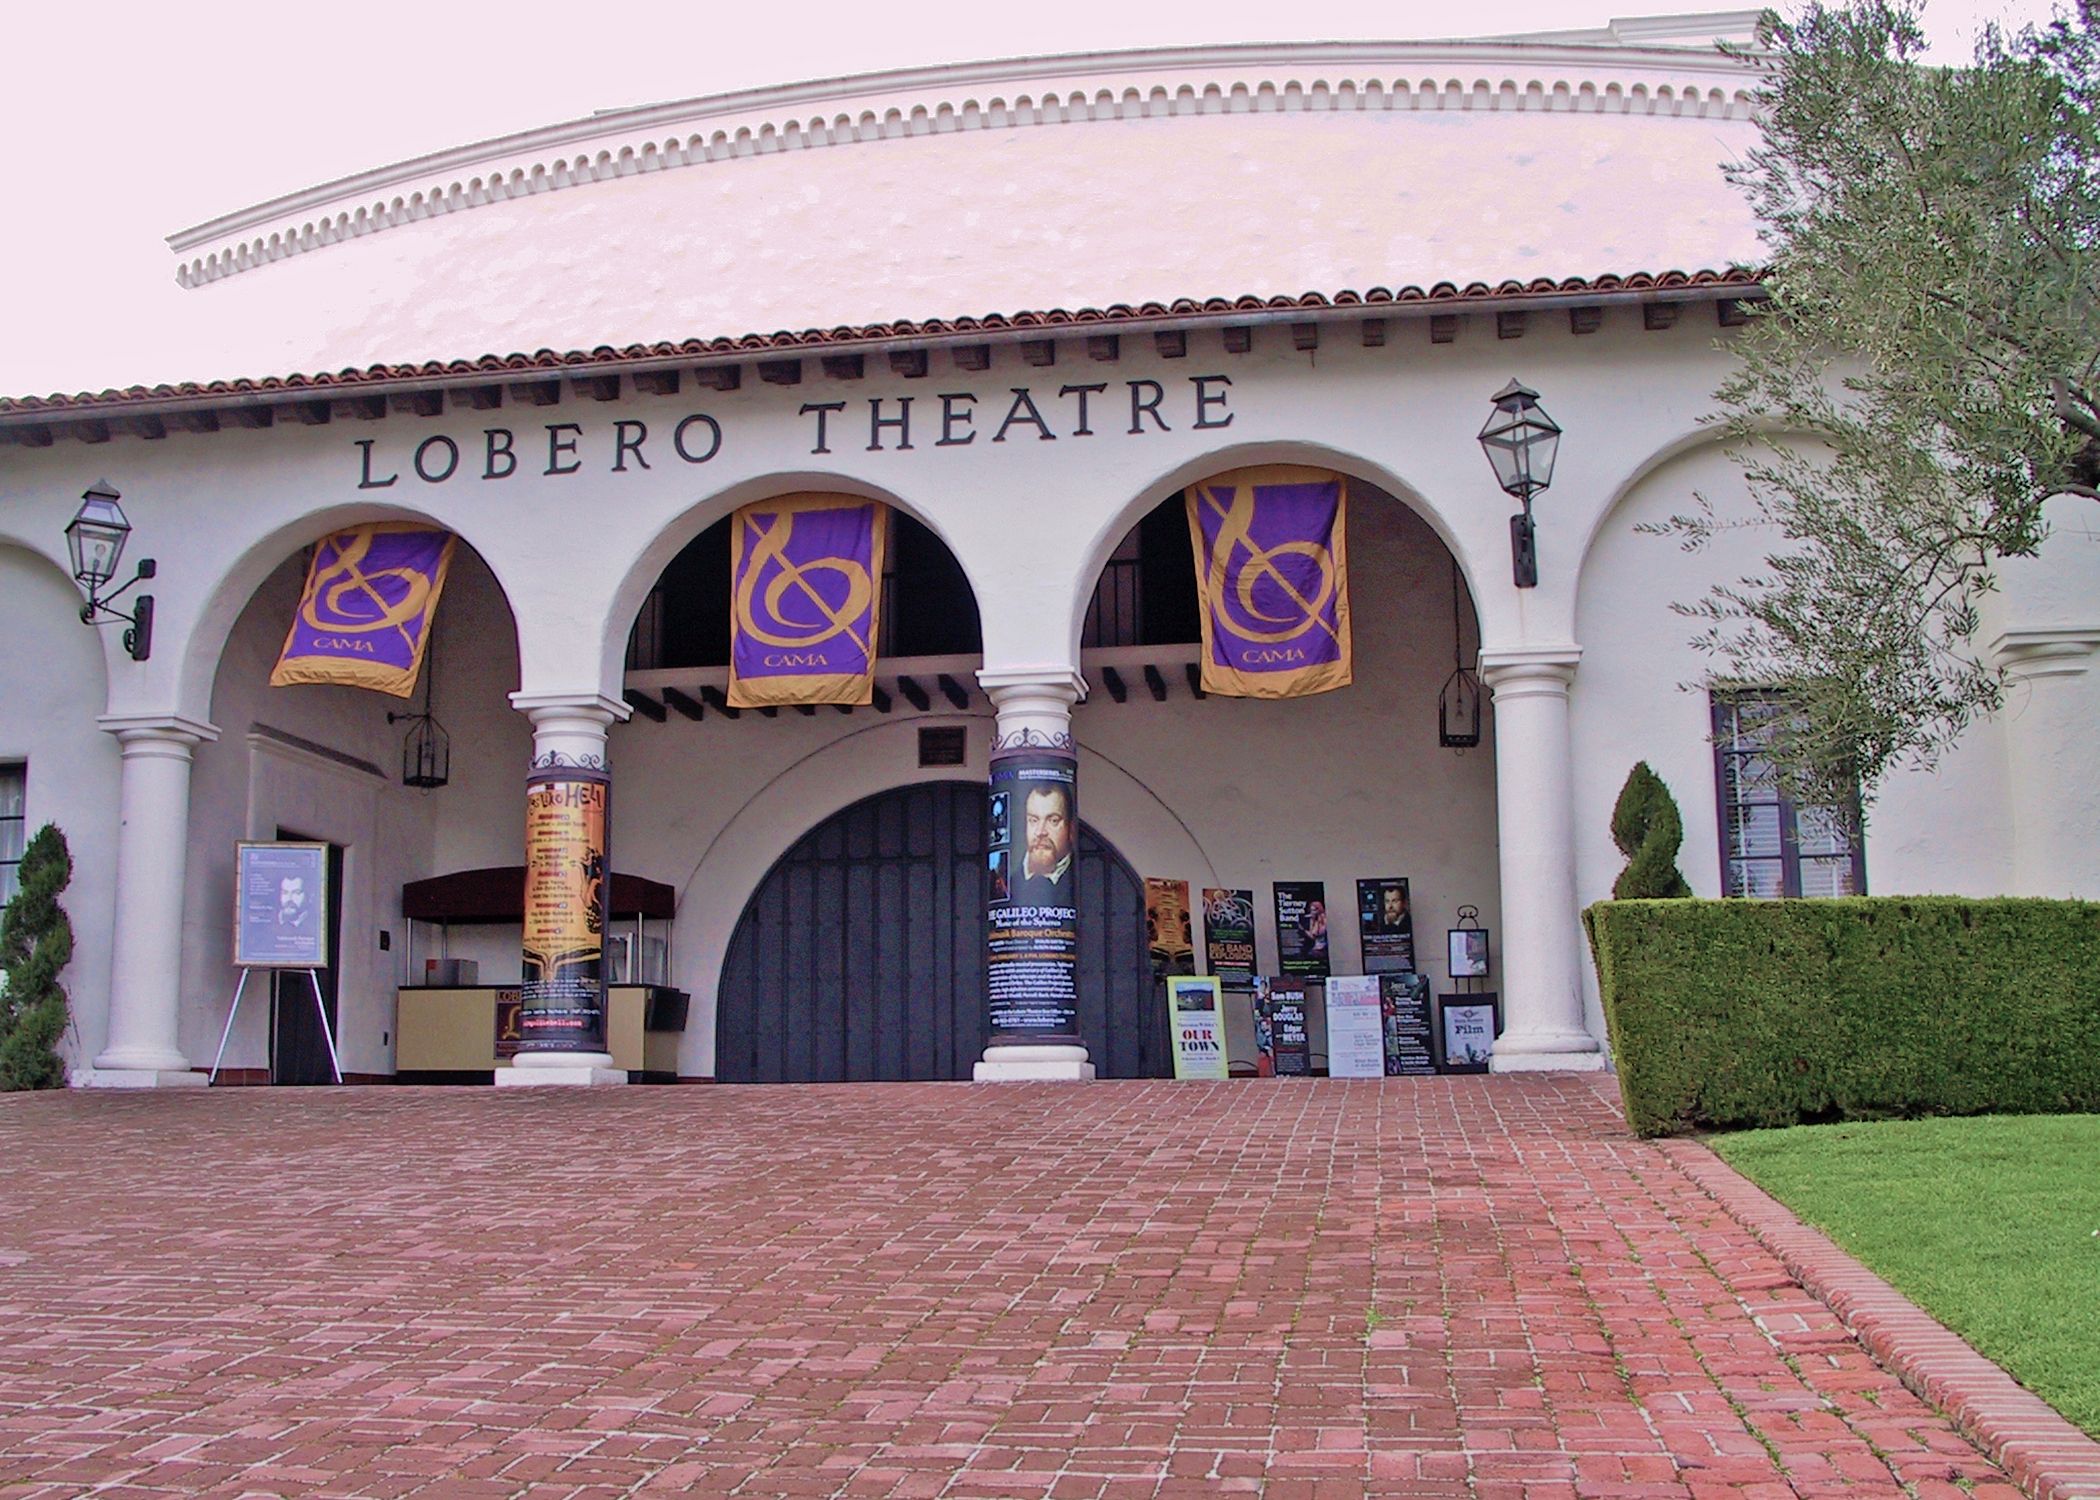 The front of the historic landmark Lobero Theatre in Santa Barbara CA, with its white facade and 3 large arches